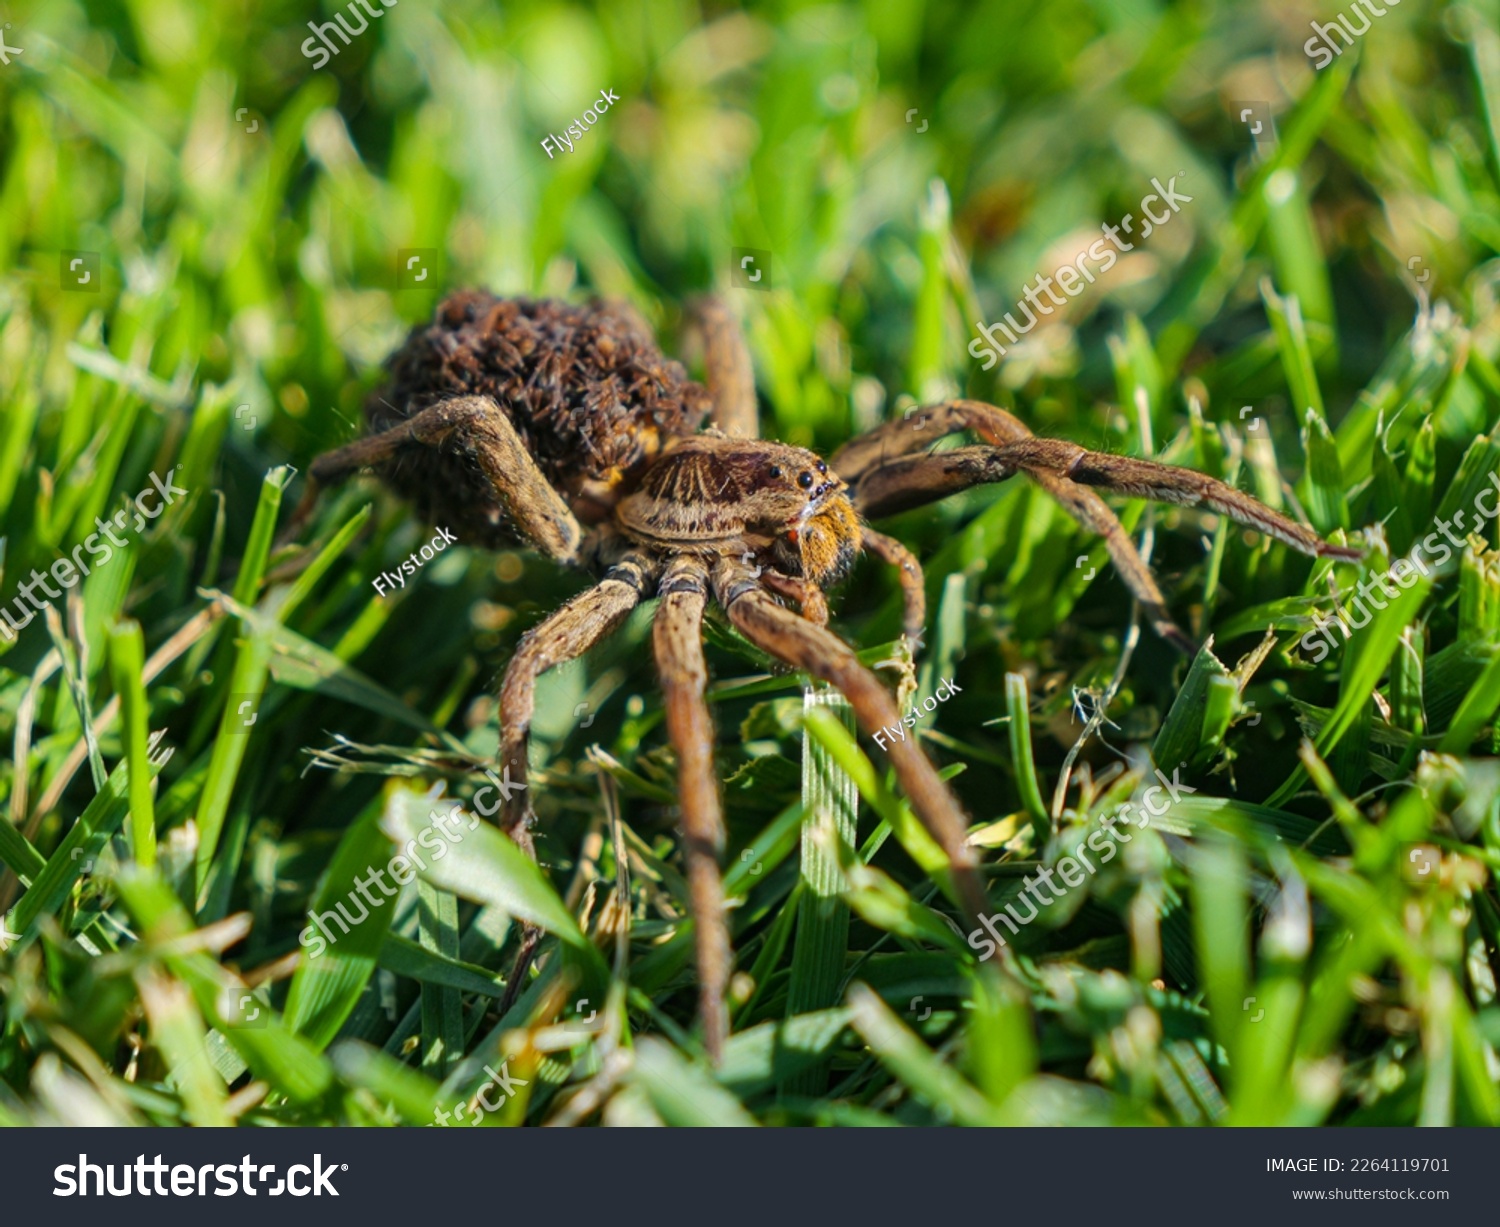 CLOSE UP: European tarantula on mowed green lawn with offspring on her back. Tarantula wolf spider carrying little spiderlings on her abdomen. Venomous eight-legged predator hunting pests in garden. #2264119701